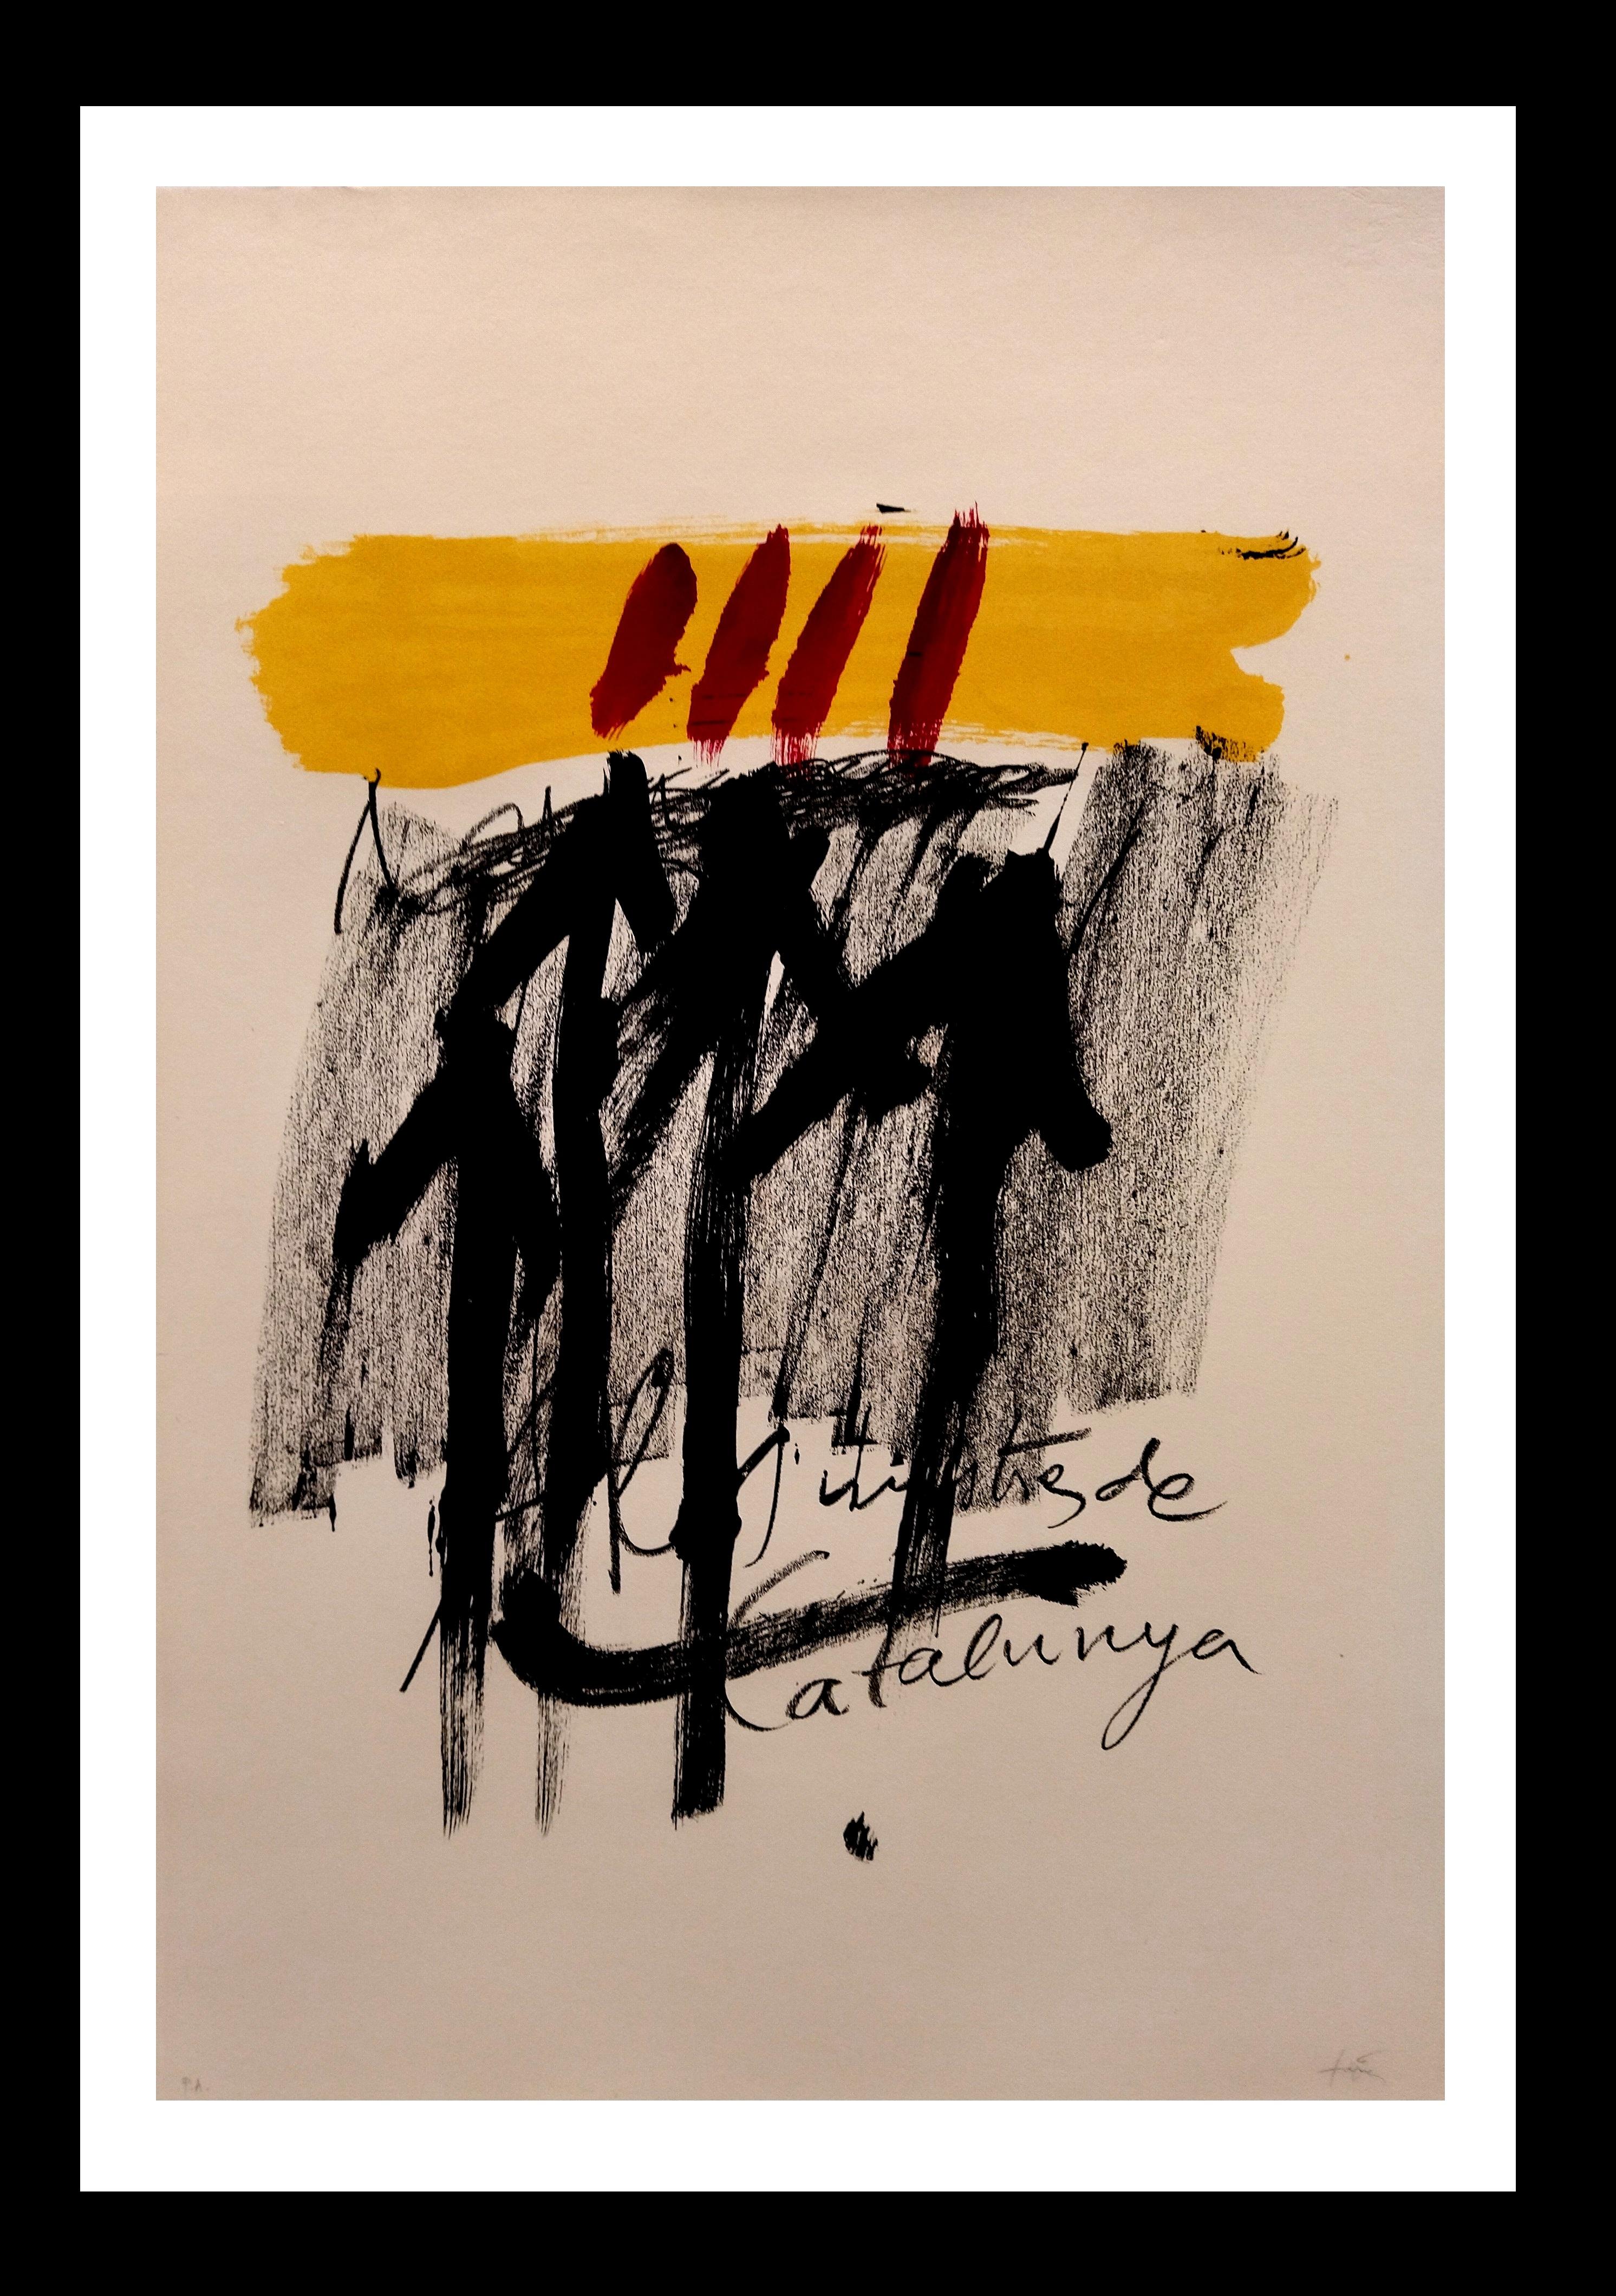  Tapies  Black  Red  Yellow  Vertical  original lithograph painting - Abstract Print by Antoni Tàpies